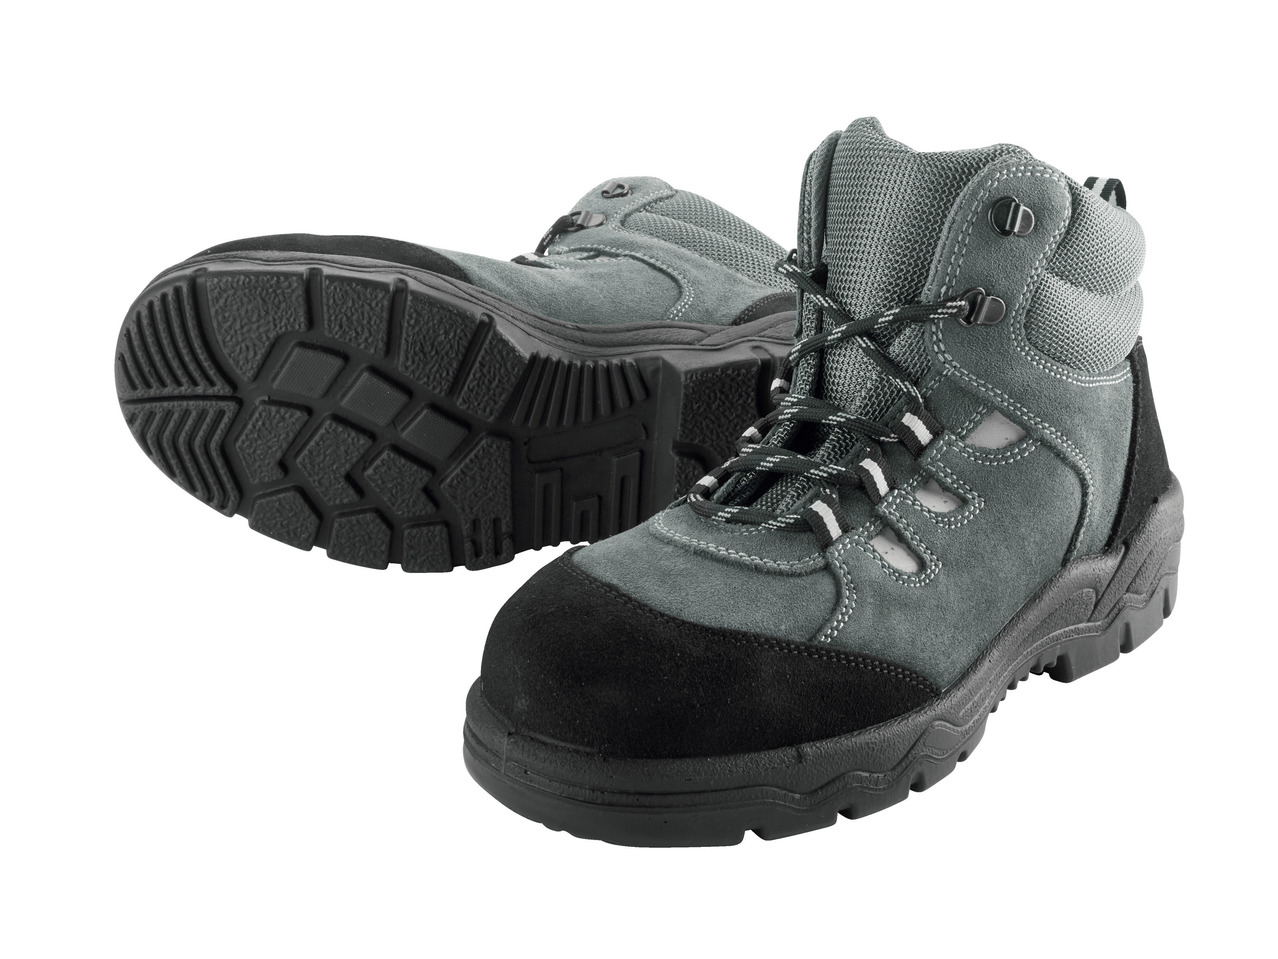 POWERFIX Men's Leather Safety Shoes